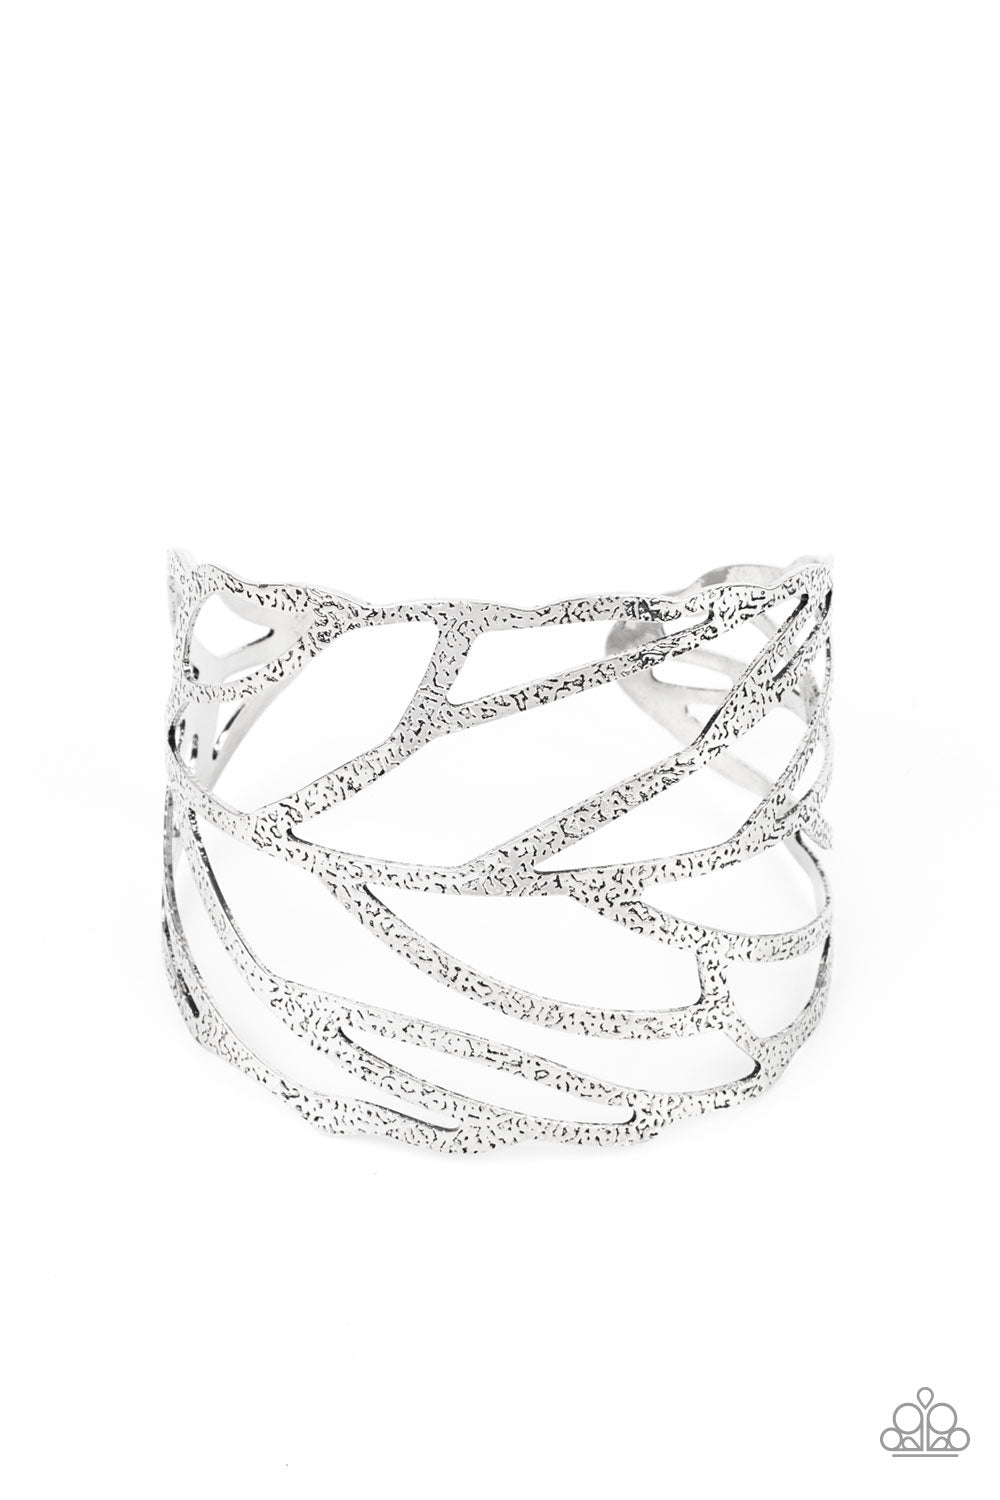 Hammered in rustic details, an airy silver feather wraps around the wrist, creating a seasonal cuff.